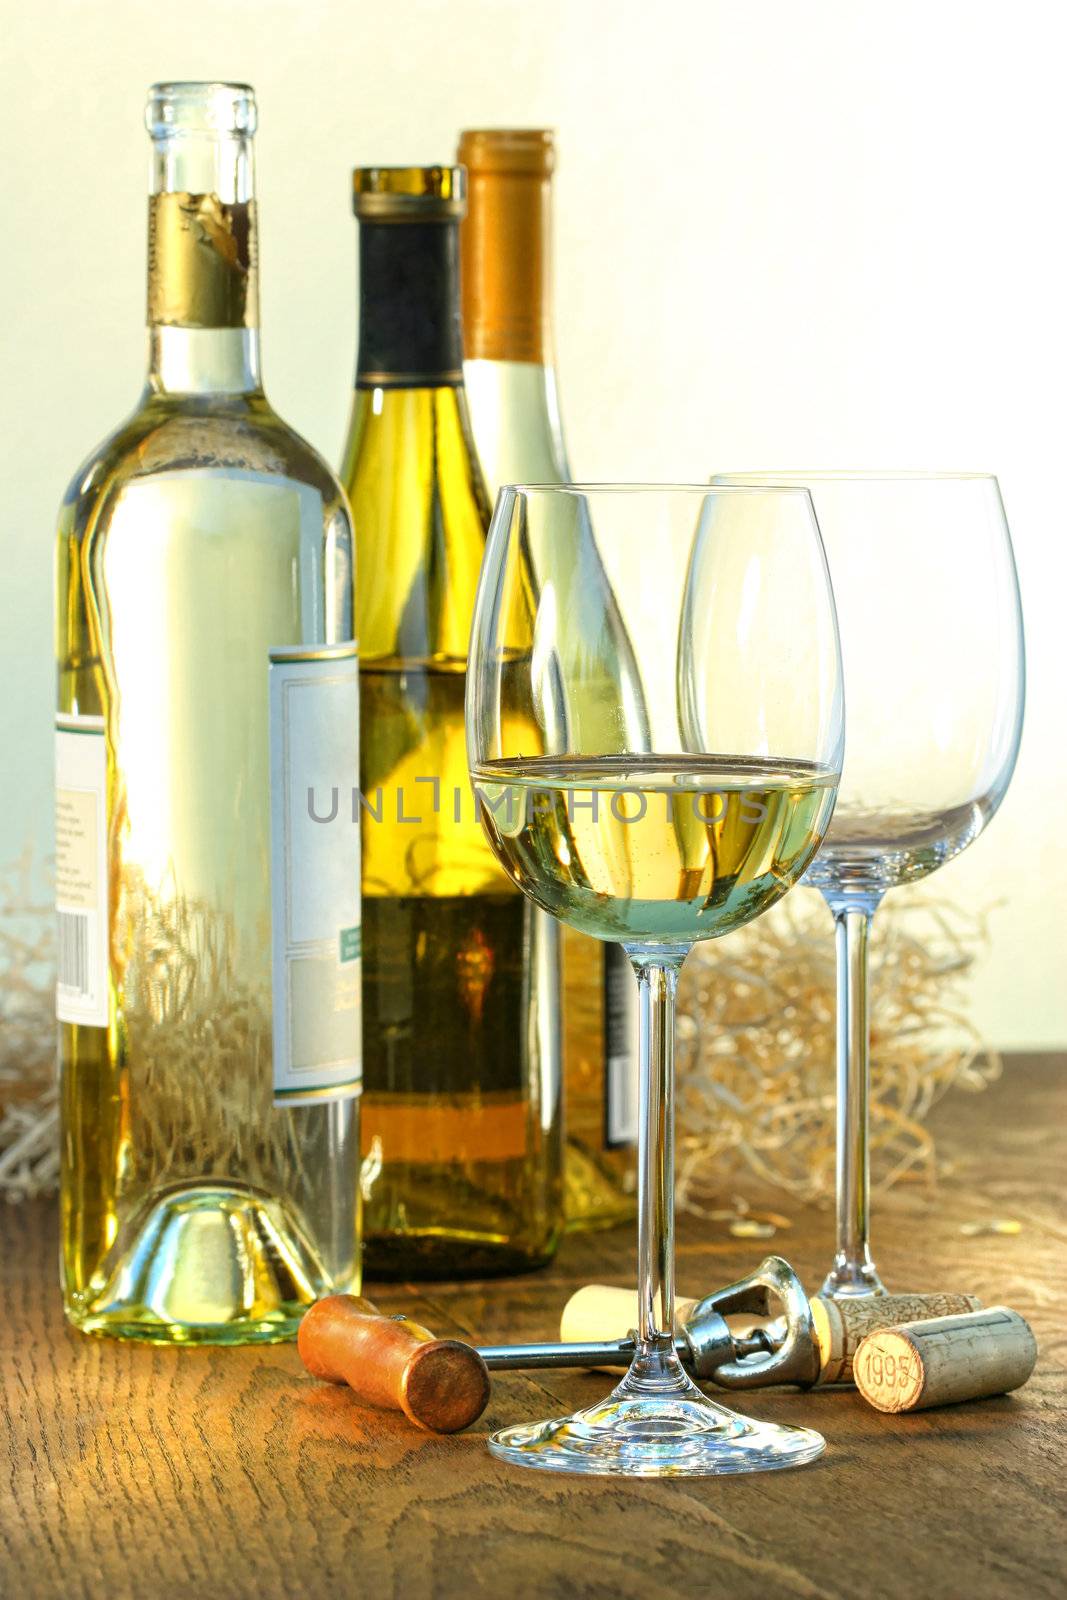 Bottles of white wine with glasses ready for wine tasting